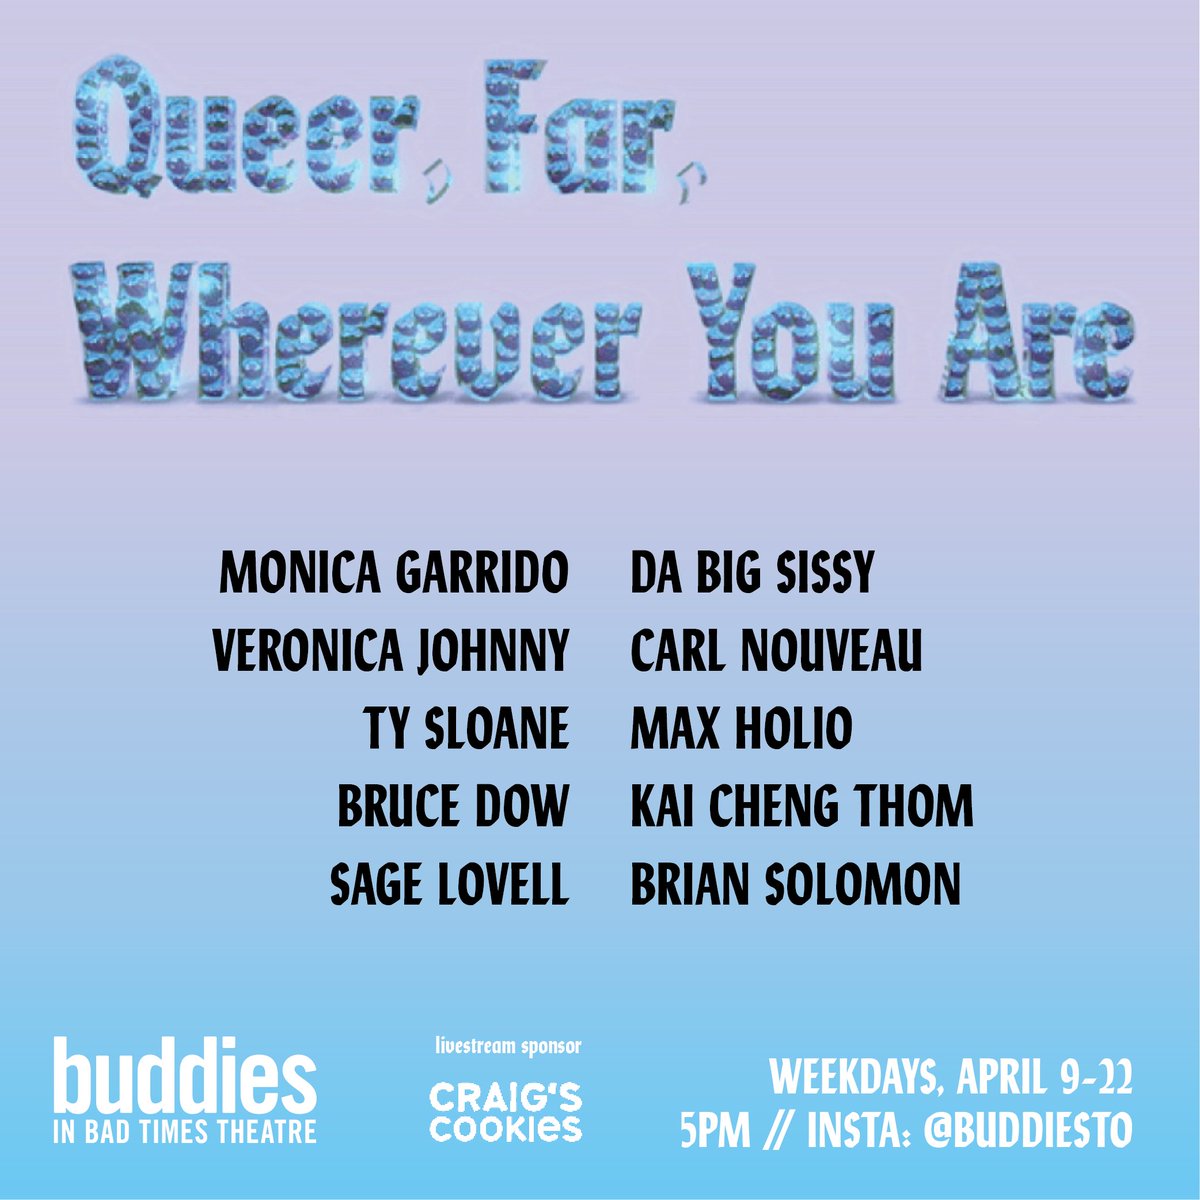 Our Queer, Far, Wherever You series continues with another ten artists coming LIVE to your phones from tomorrow to April 22: @DowBruce, @MonicaGarridoH, @tyjsloane, @TheJohnnysRock, @maxholio, @da_bigsissy + more! bit.ly/2xo7NSO